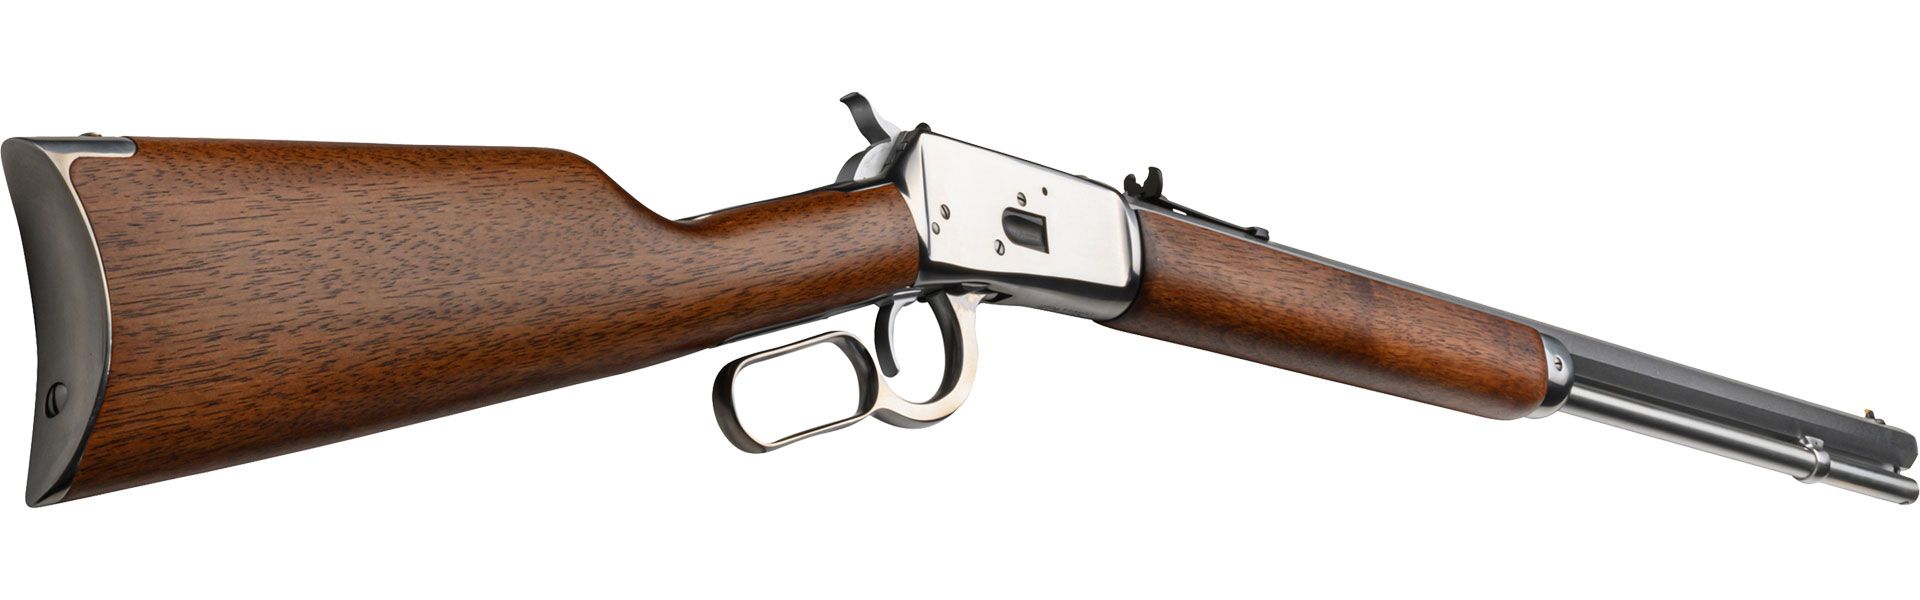 R92 Hardwood, 357 MAG / 38 SPECIAL +P, Polished Stainless, Octagonal Barrel, 24 in.